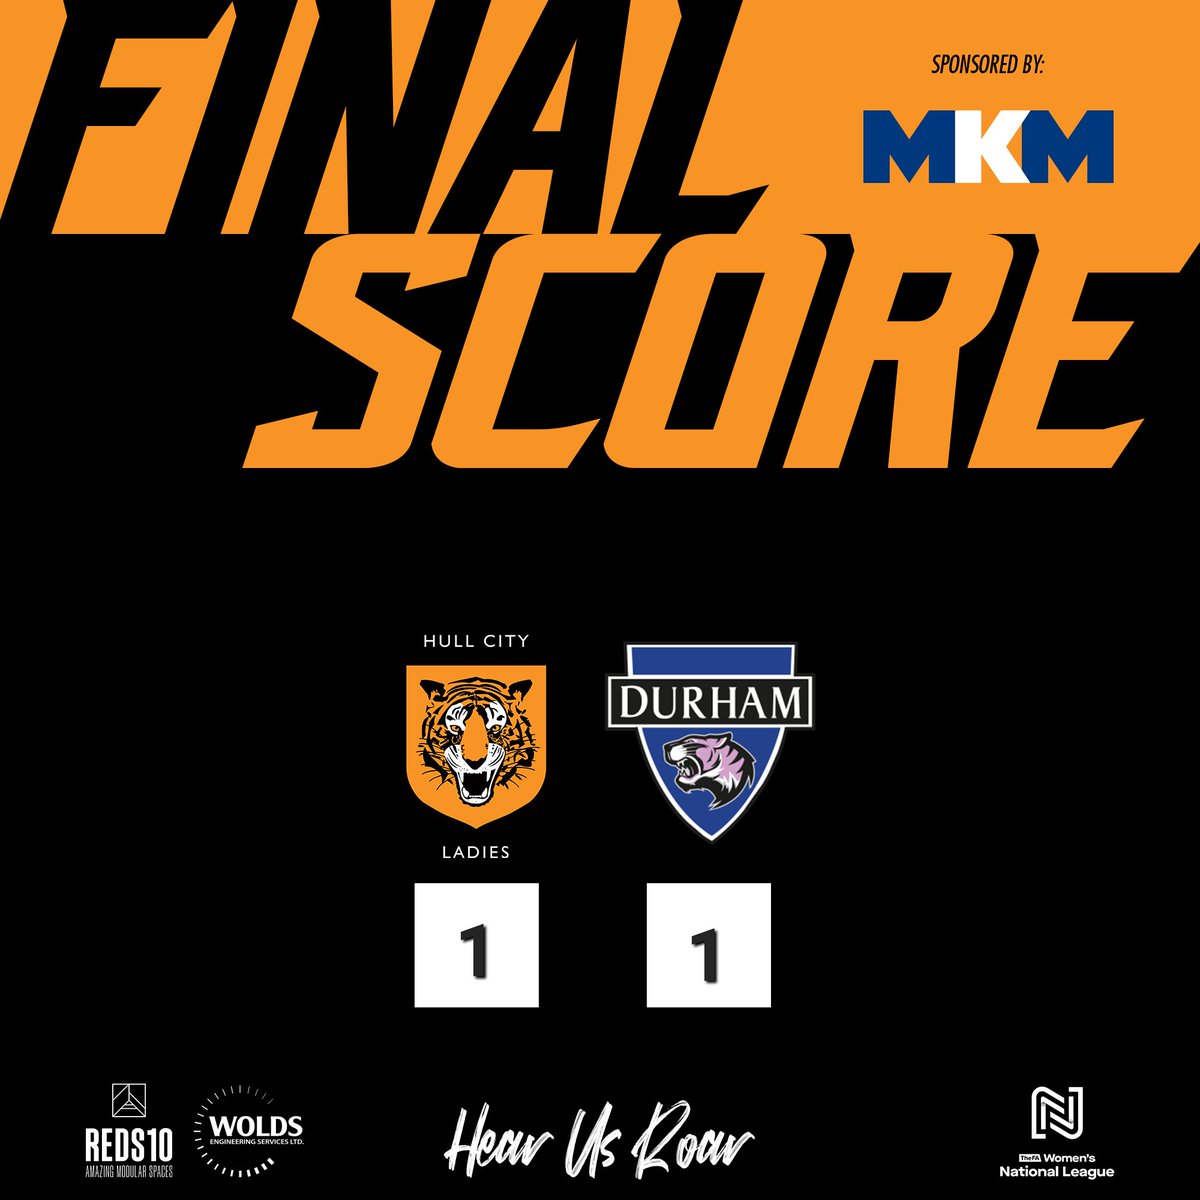 Hull City Ladies Reserves 1 - 1 Durham Cestria Reserves Hull City Ladies secure a well deserved point at North Cave Playing Fields. Lily Scott with the goal for the Tigresses, thank you for everyone's support today in terrible conditions #HearUsRoar